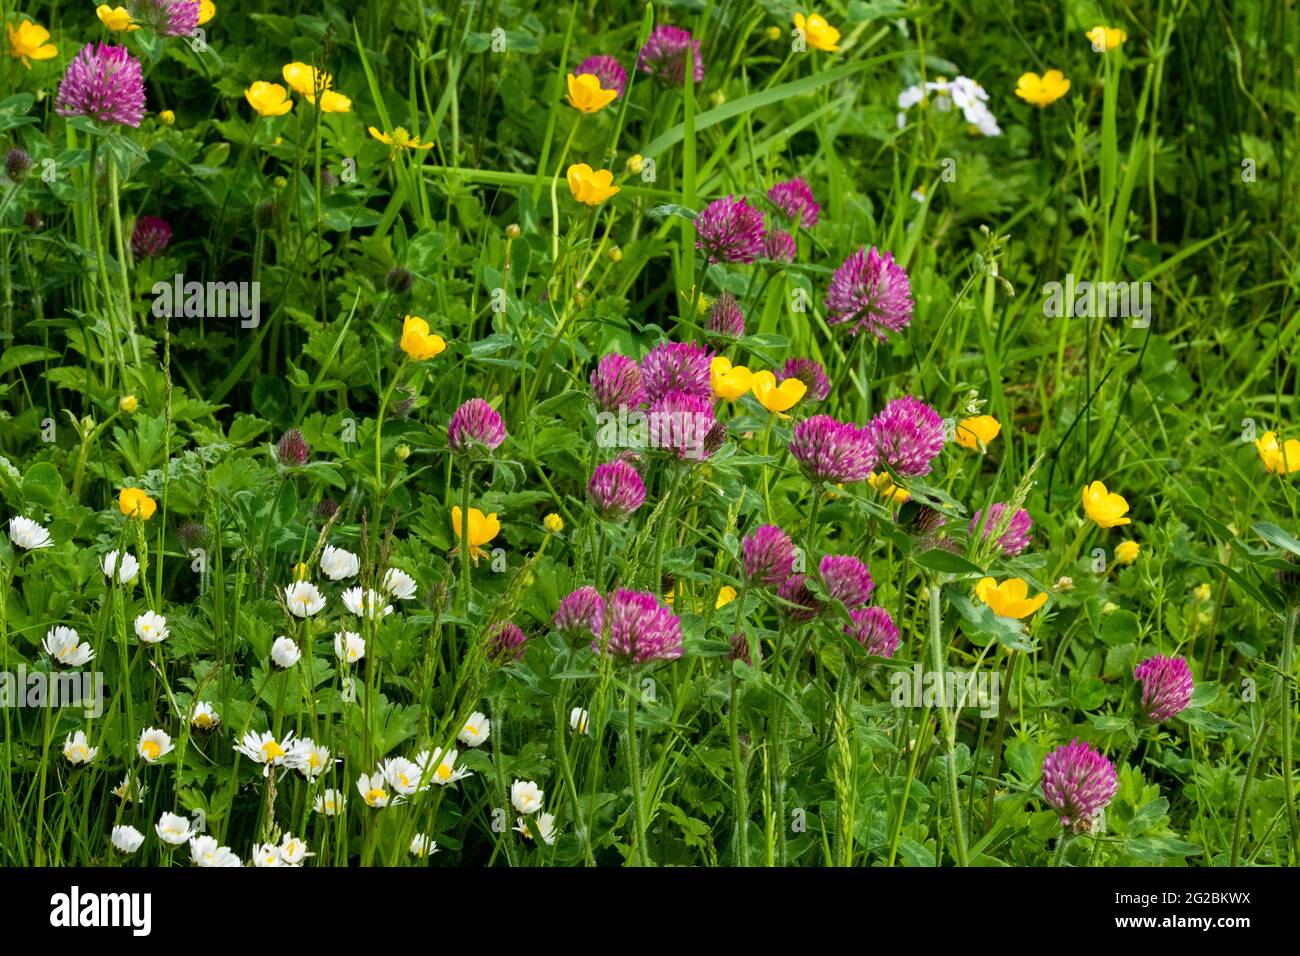 Clover, buttercups and daisies in a Yorkshire field. Stock Photo